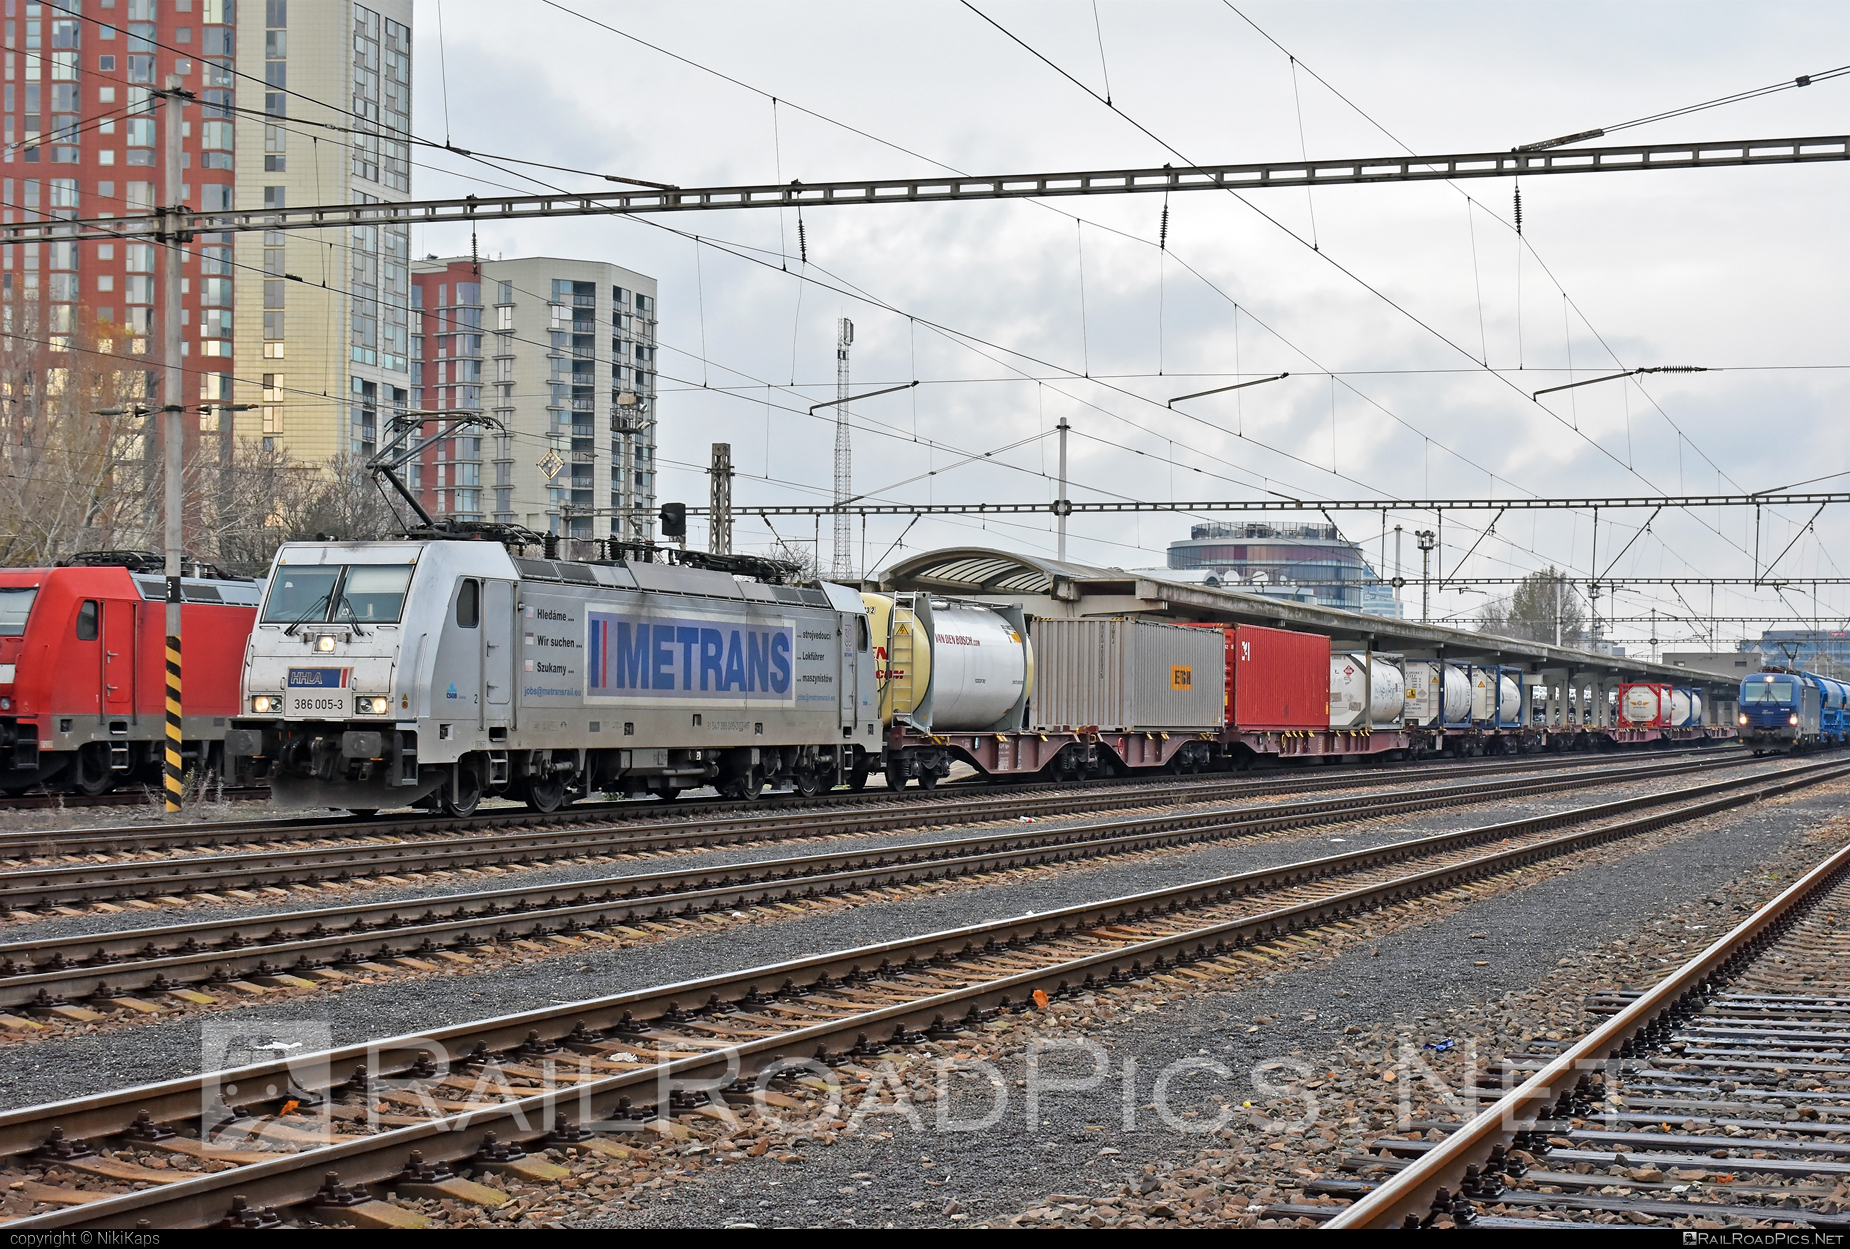 Bombardier TRAXX F140 MS - 386 005-3 operated by METRANS Rail s.r.o. #bombardier #bombardiertraxx #flatwagon #hhla #metrans #metransrail #traxx #traxxf140 #traxxf140ms